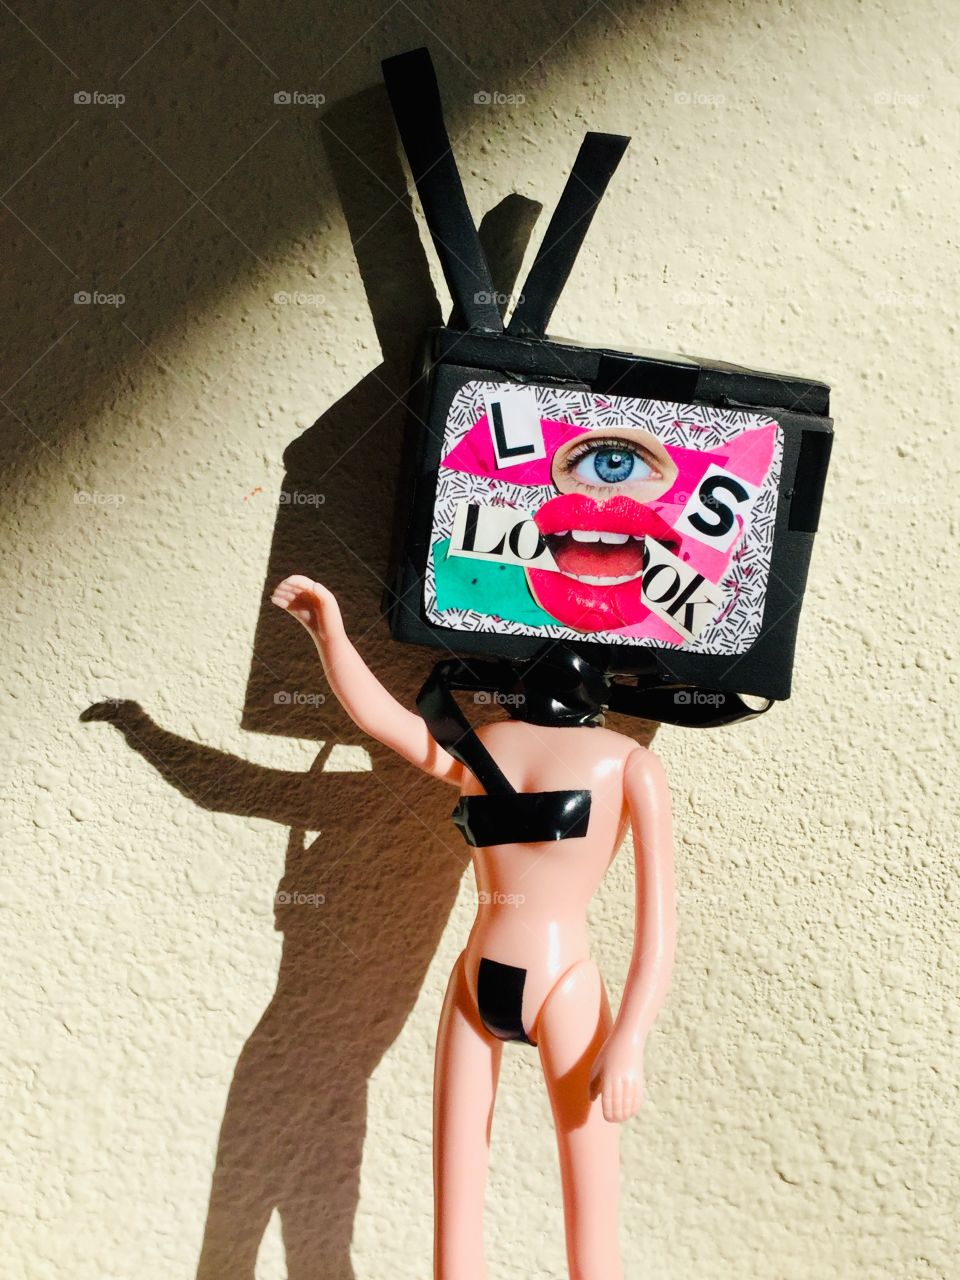 “The Programmed Human Being”. This is a piece of art I created using a plastic doll and replacing the head with a TV set made from foam. The message is how TV programs our minds, making us to look at world through distortion. 